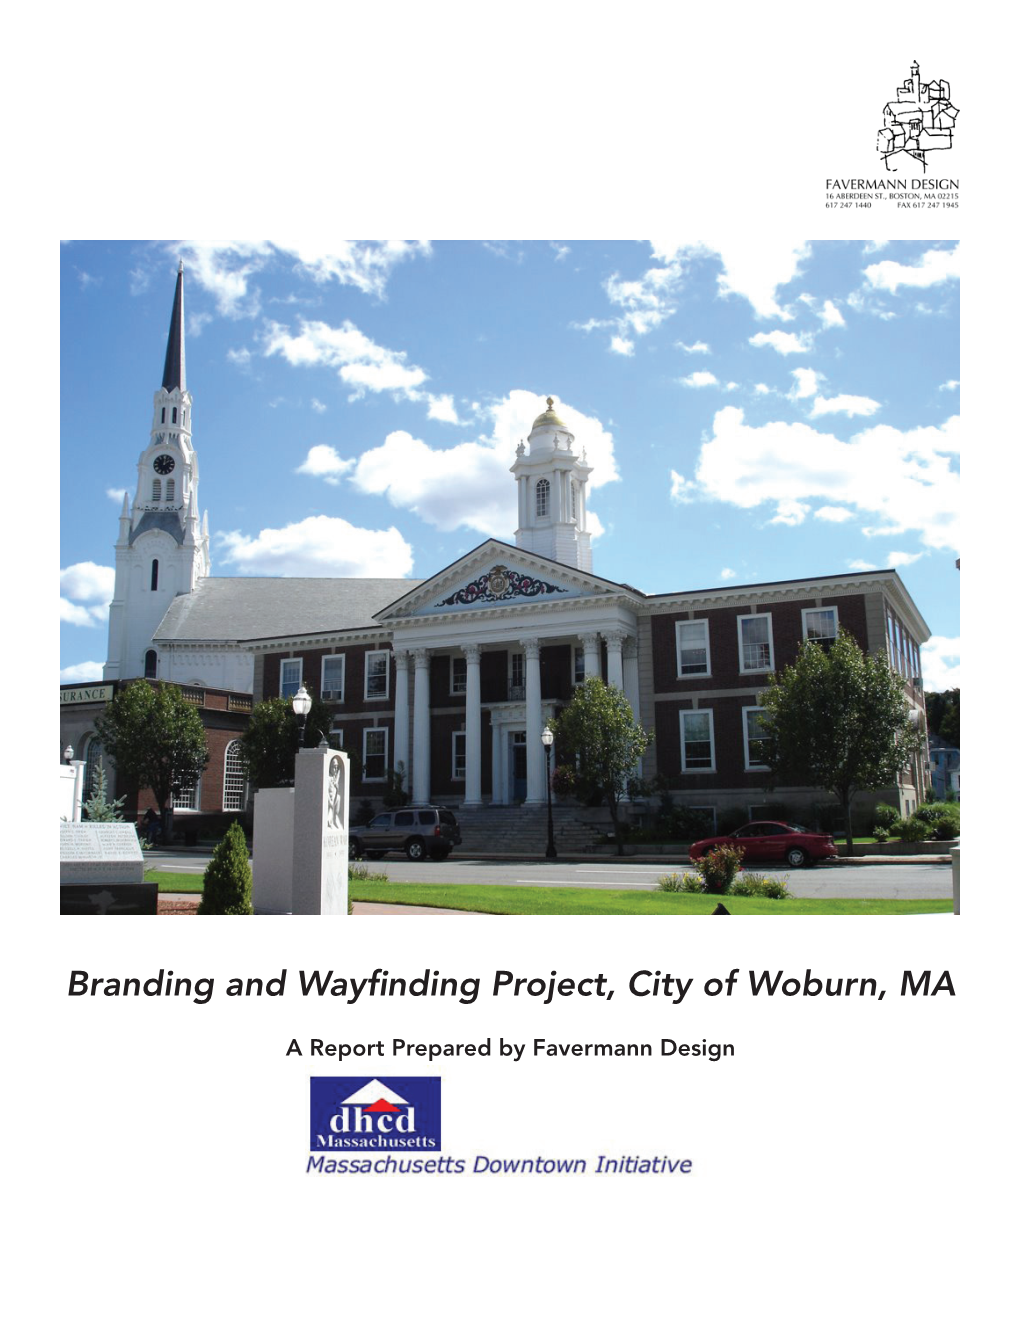 Branding and Wayfinding Project, City of Woburn, MA